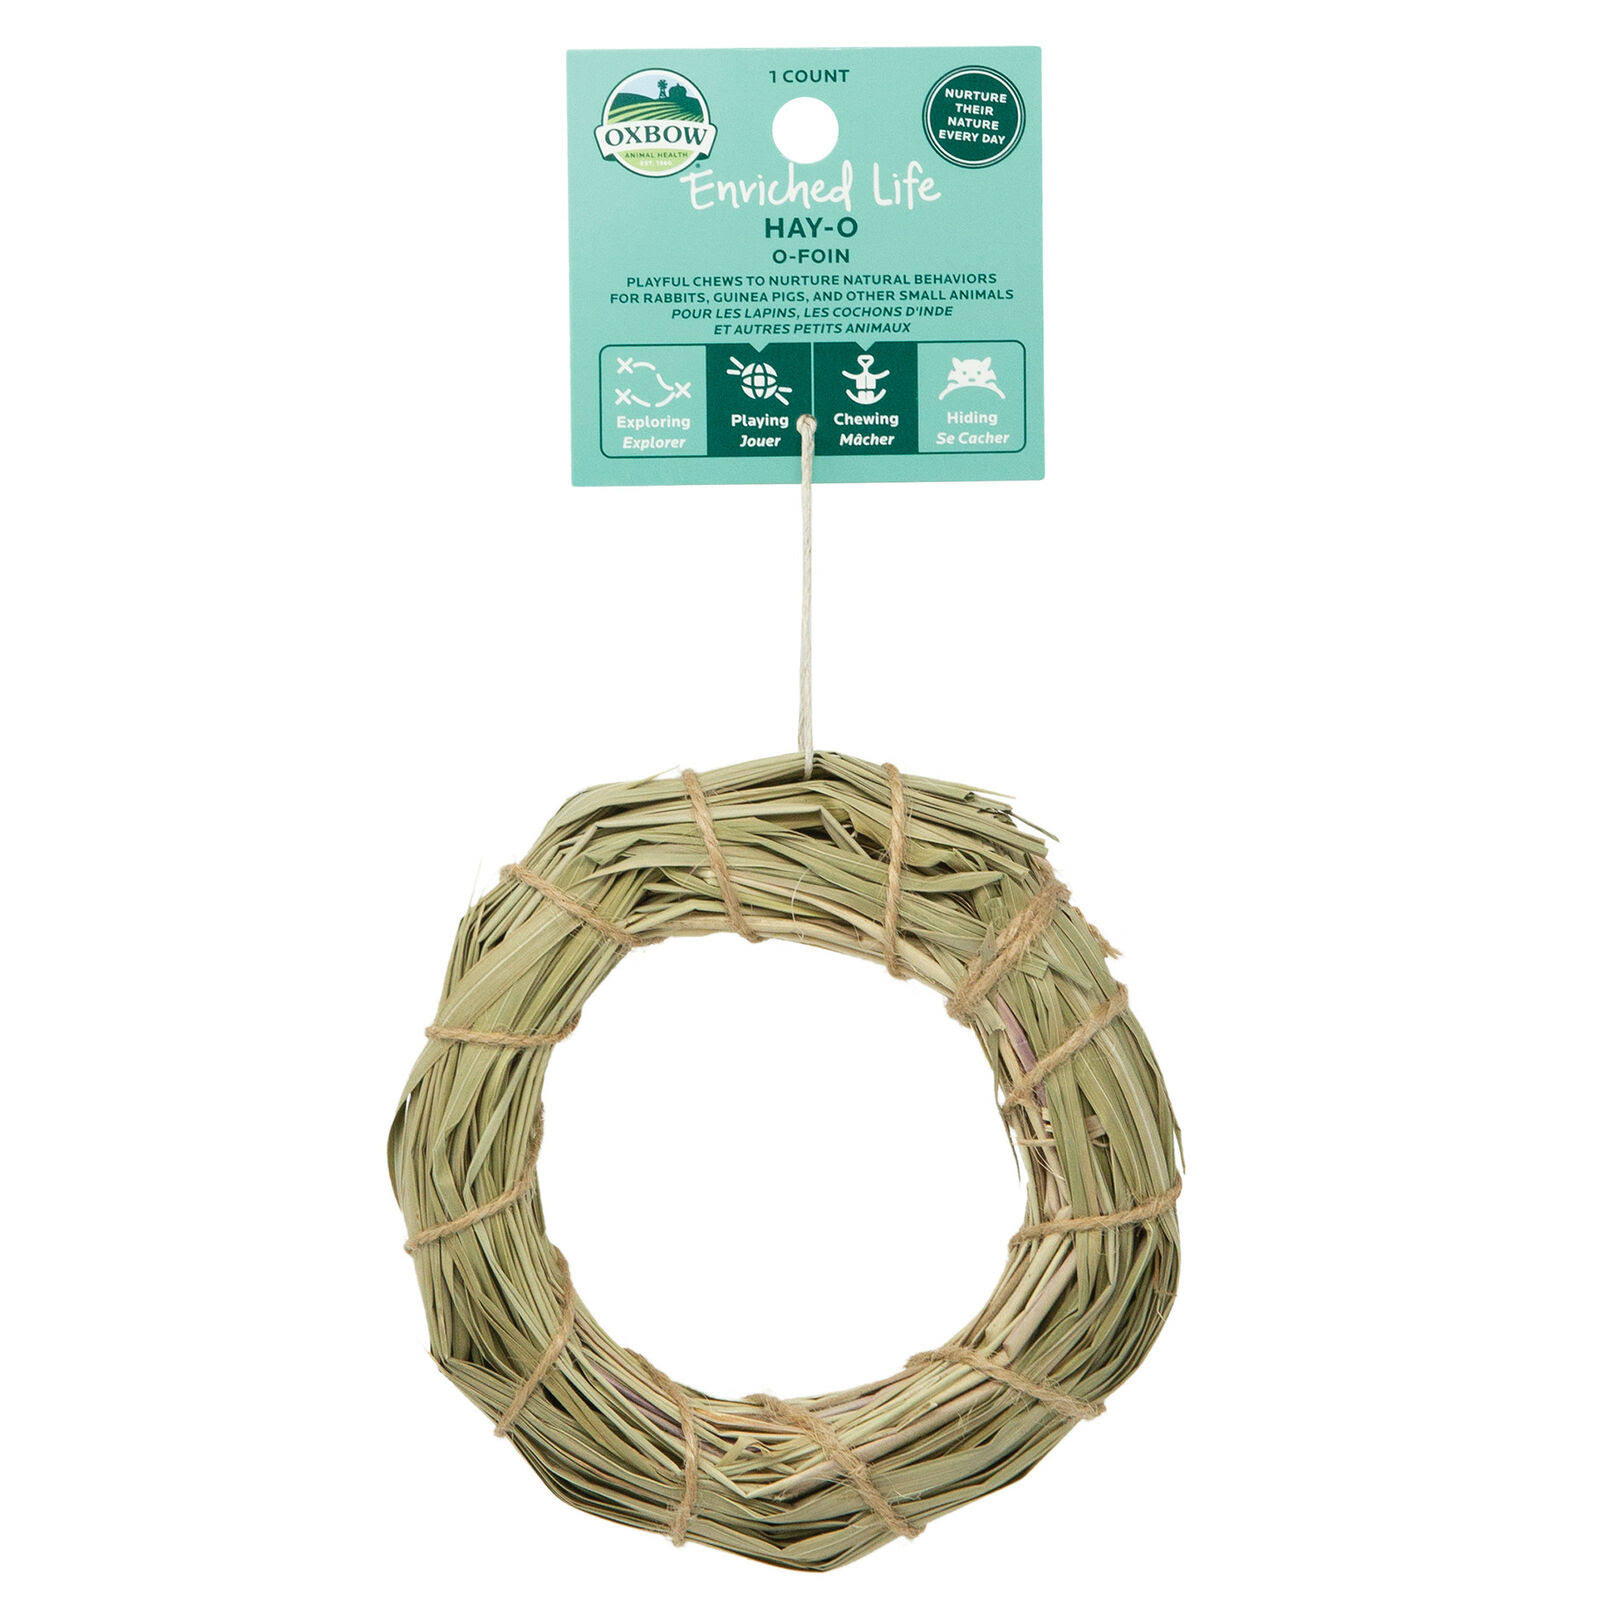 Oxbow Enriched Life Hay O Toy for Small Animals